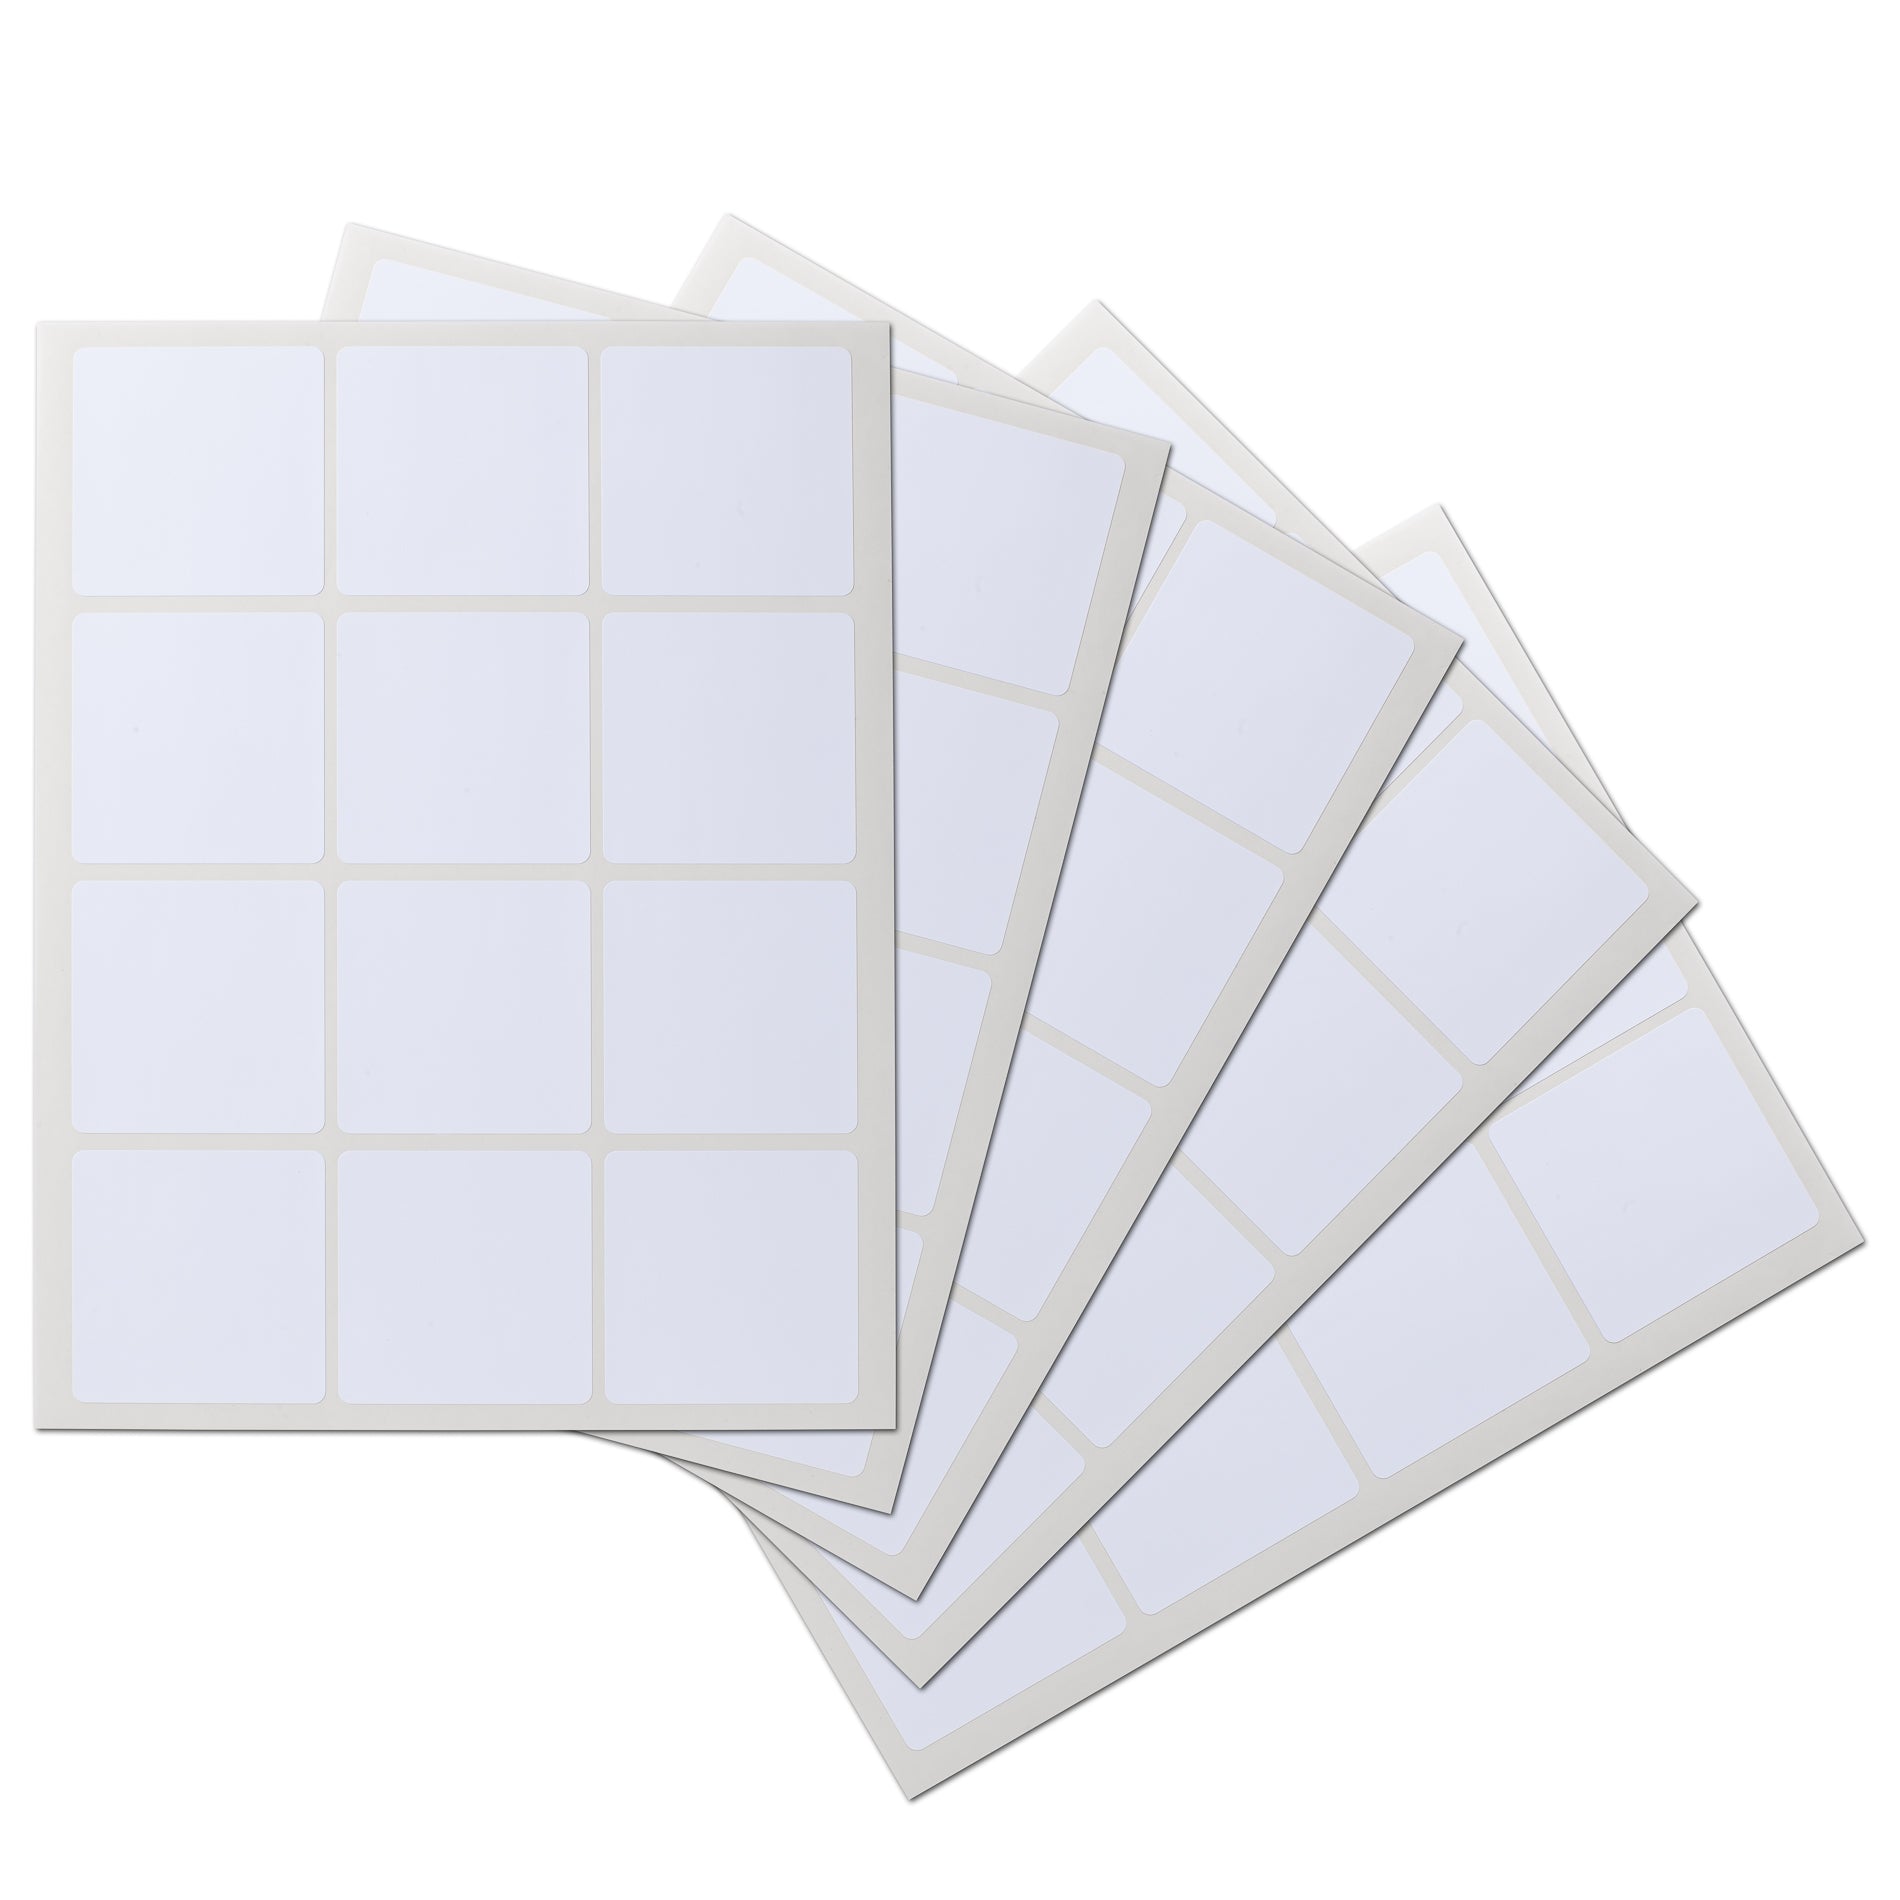 2.5 x 2.5 Square Waterproof Labels, Blank, White